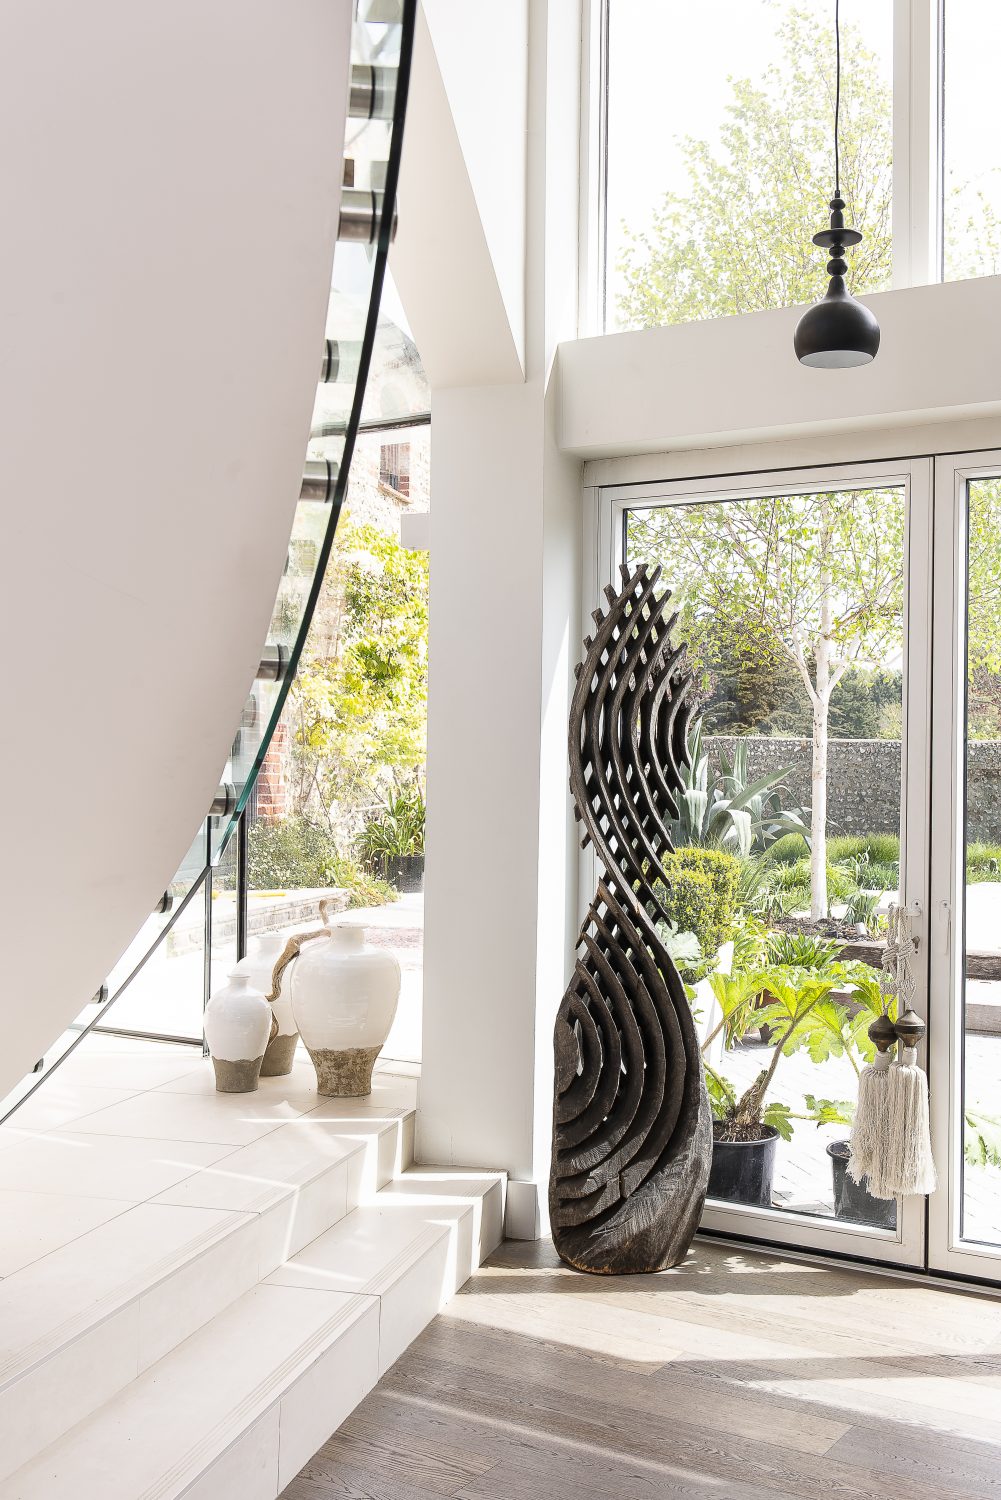 The spacious sitting room forms a link between the two parts of the house. A minimalist modern staircase sweeps up to the first floor and there are glass walls on both sides, looking out to the elegantly planted garden at the front